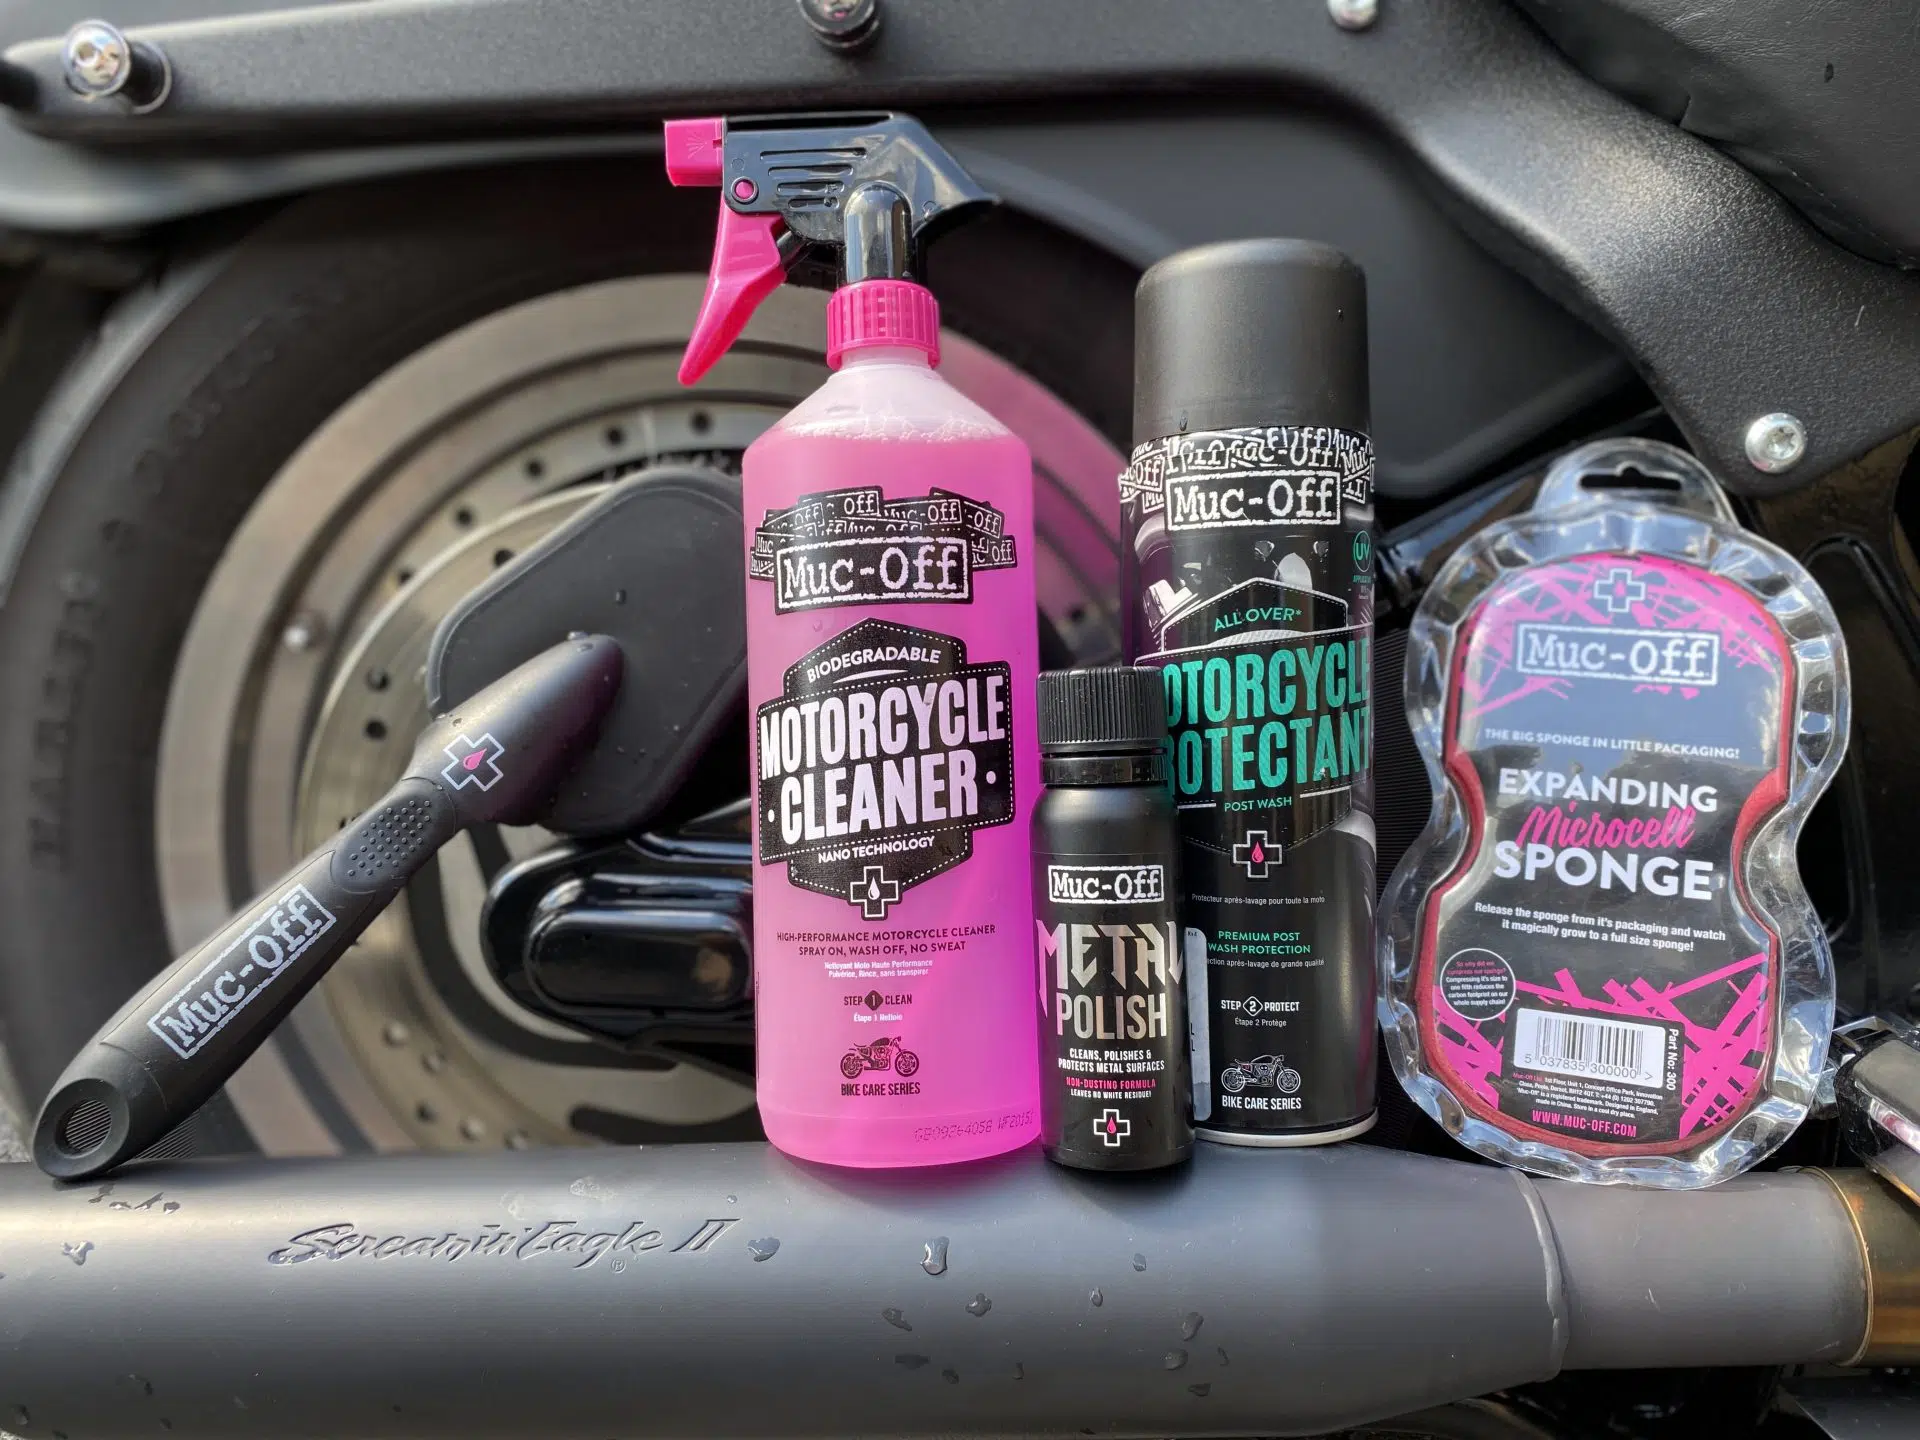 Muc-Off motorcycle cleaning products!